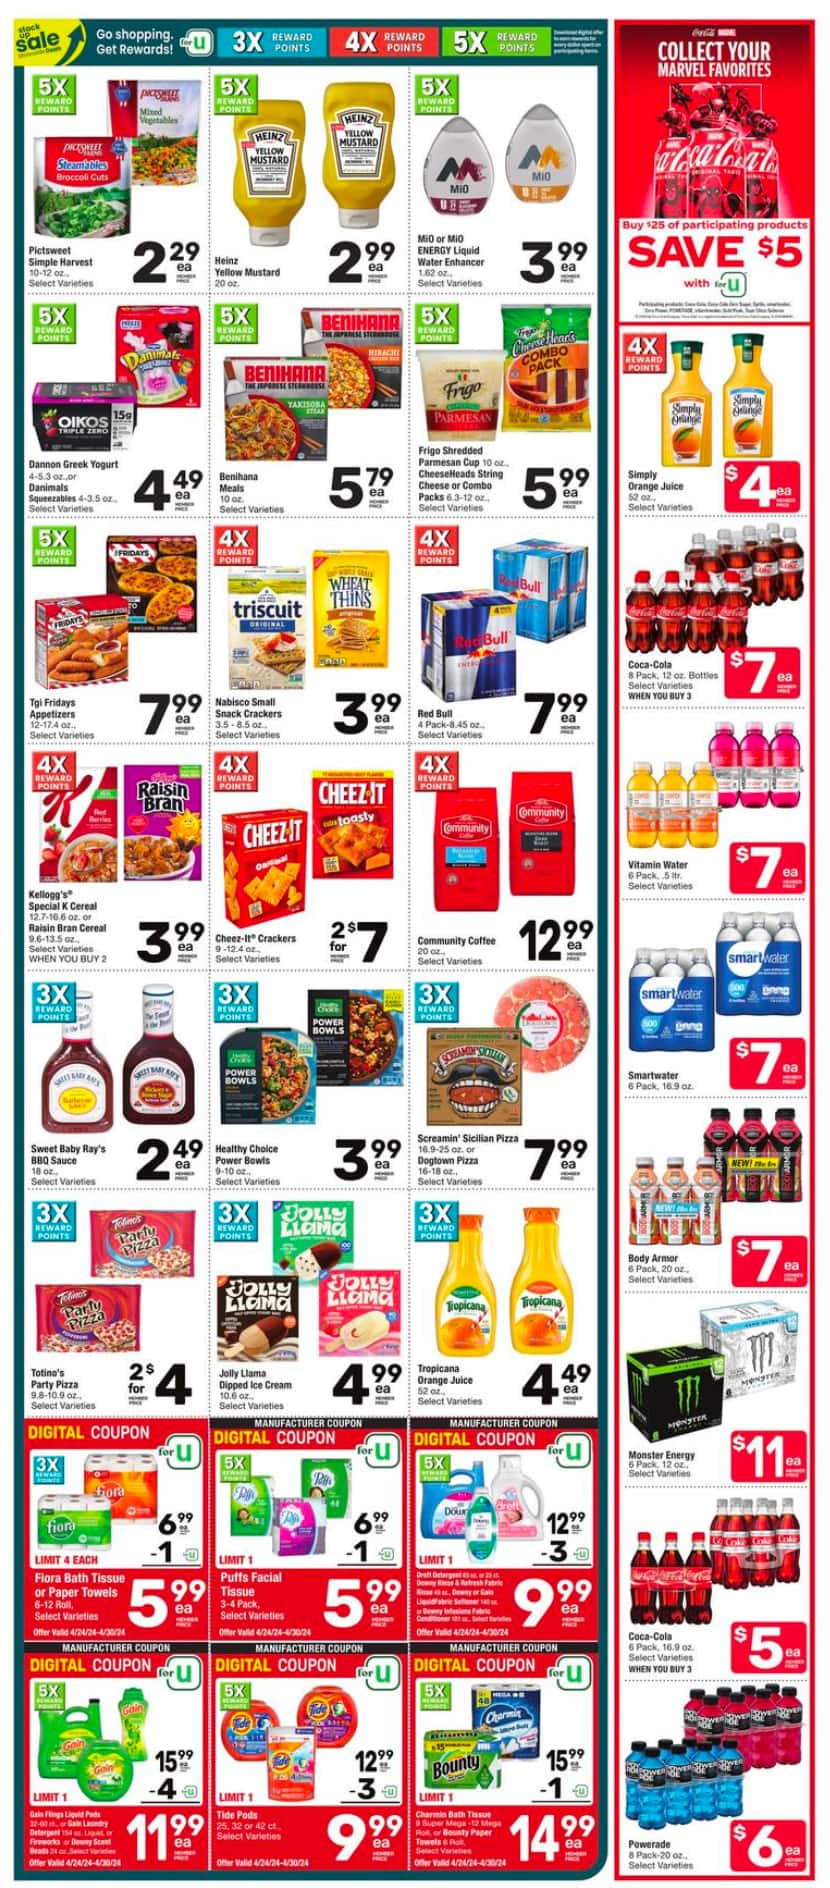 TomThumb_weekly_ad_042424_03